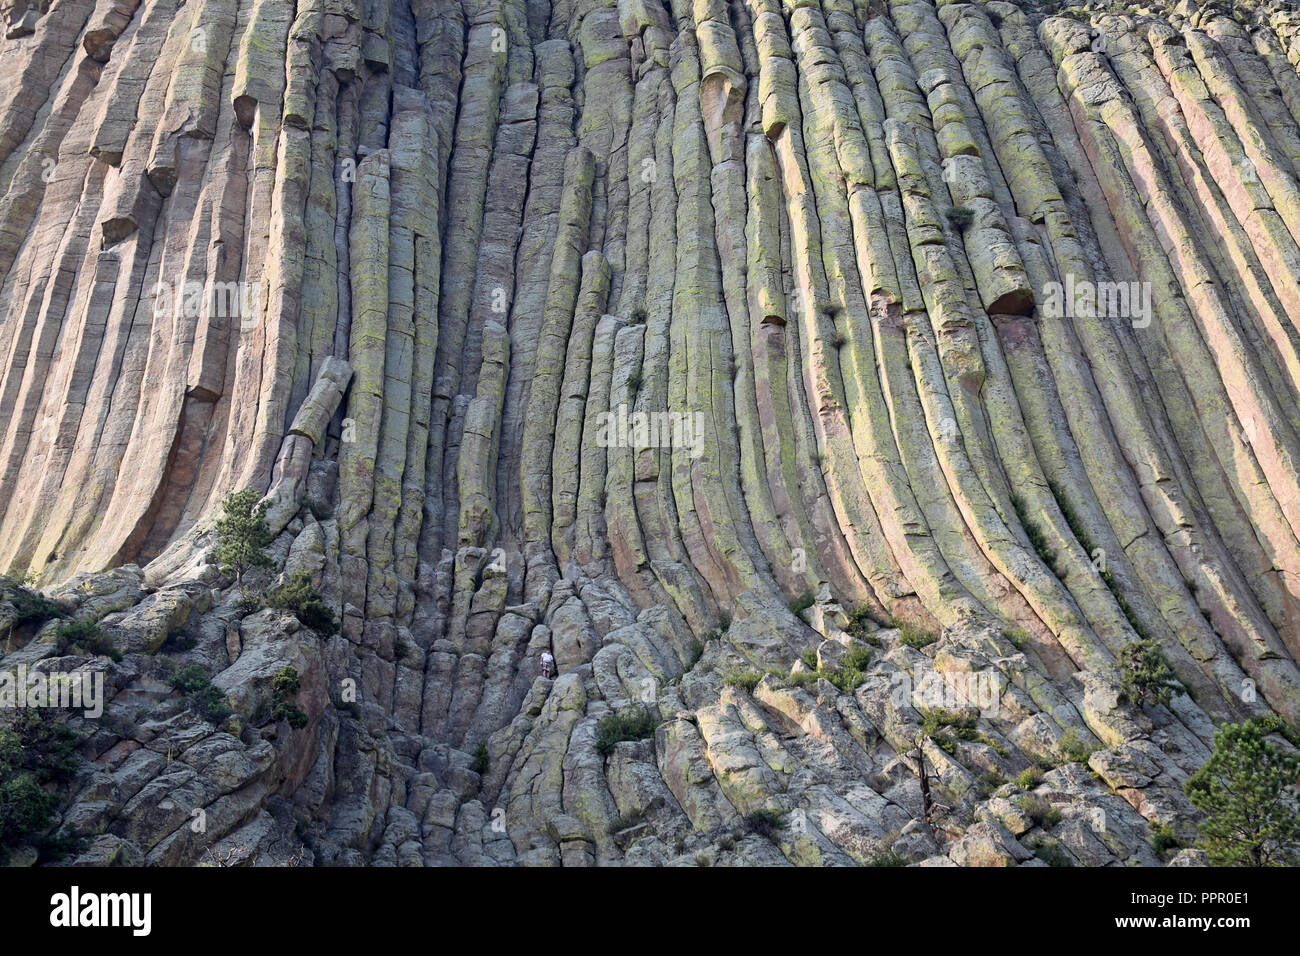 man in bottom center for scale at geological wonder of igneous columnar rock at Devils Tower Stock Photo